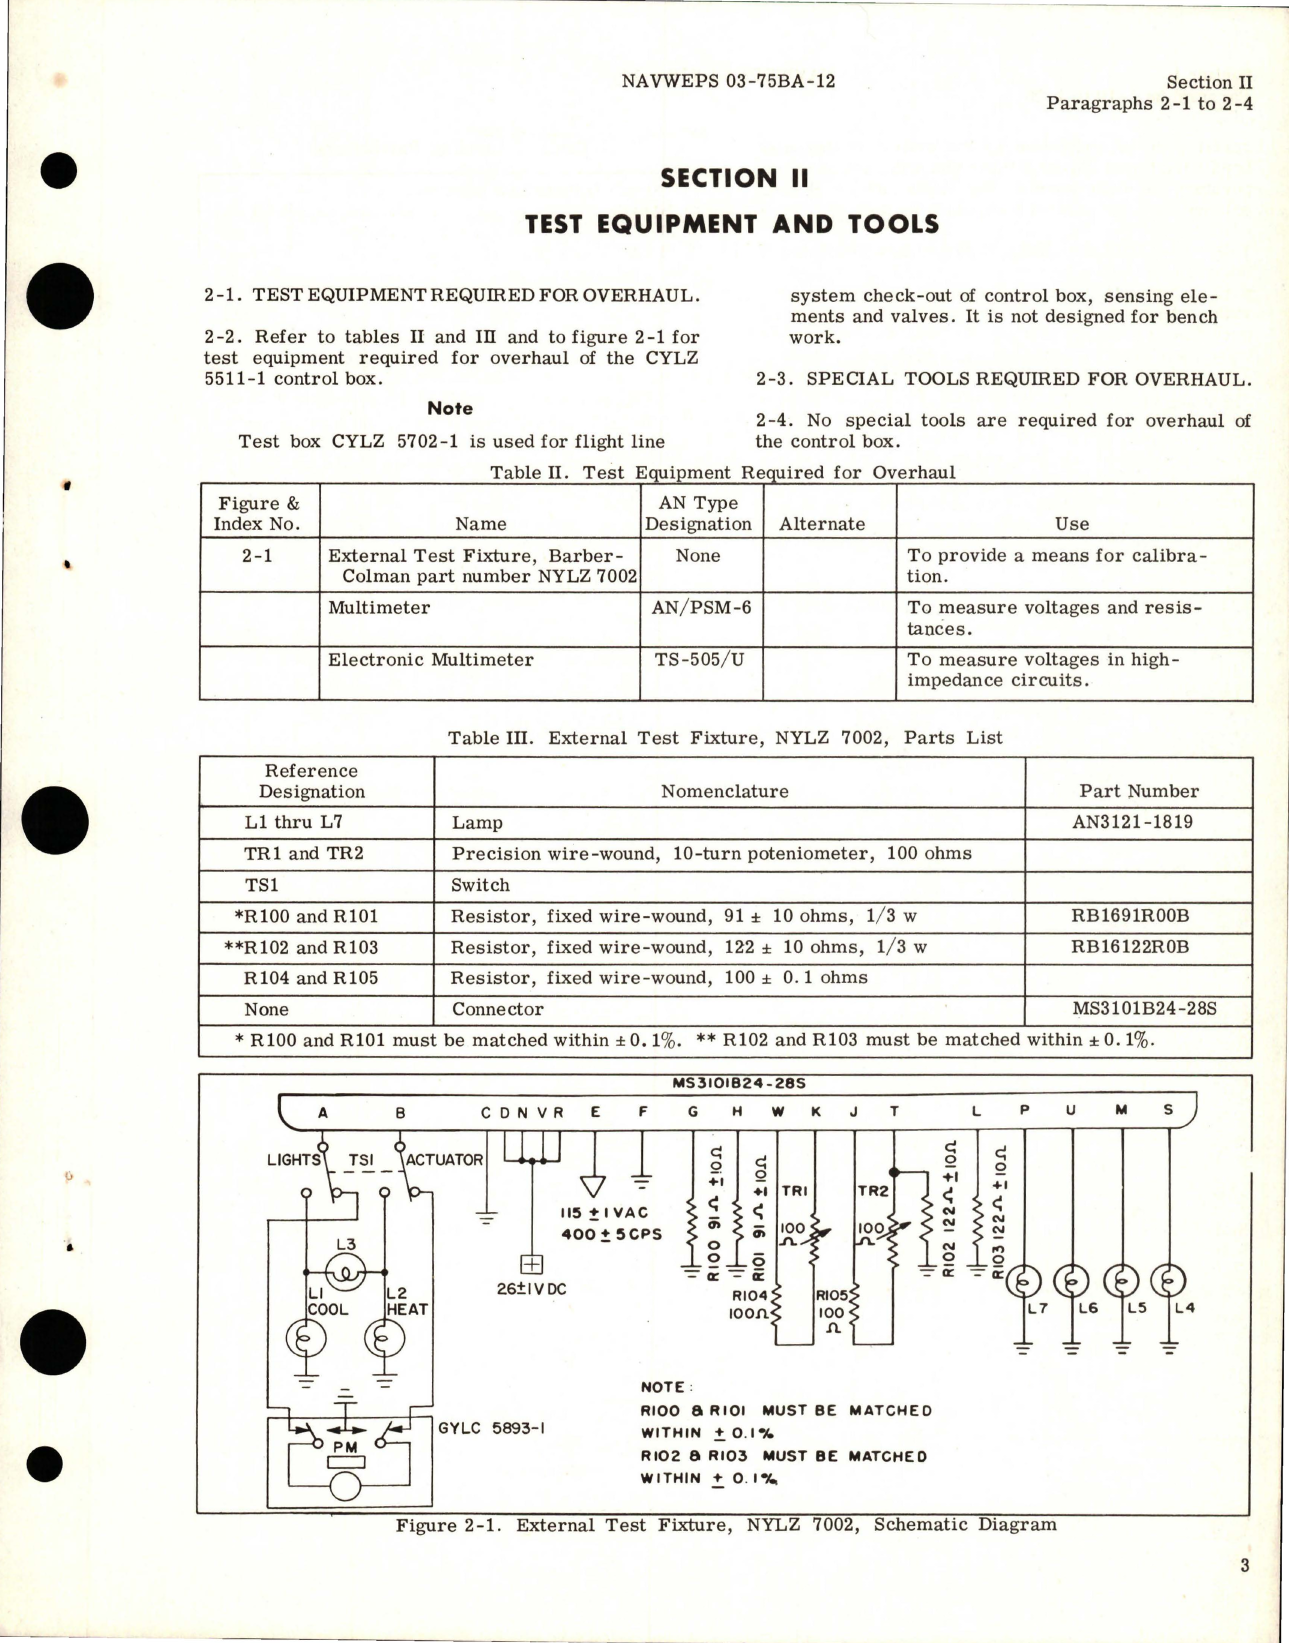 Sample page 7 from AirCorps Library document: Overhaul Instructions for Control Box Cockpit Temperature - Part CYLZ 5511-1 